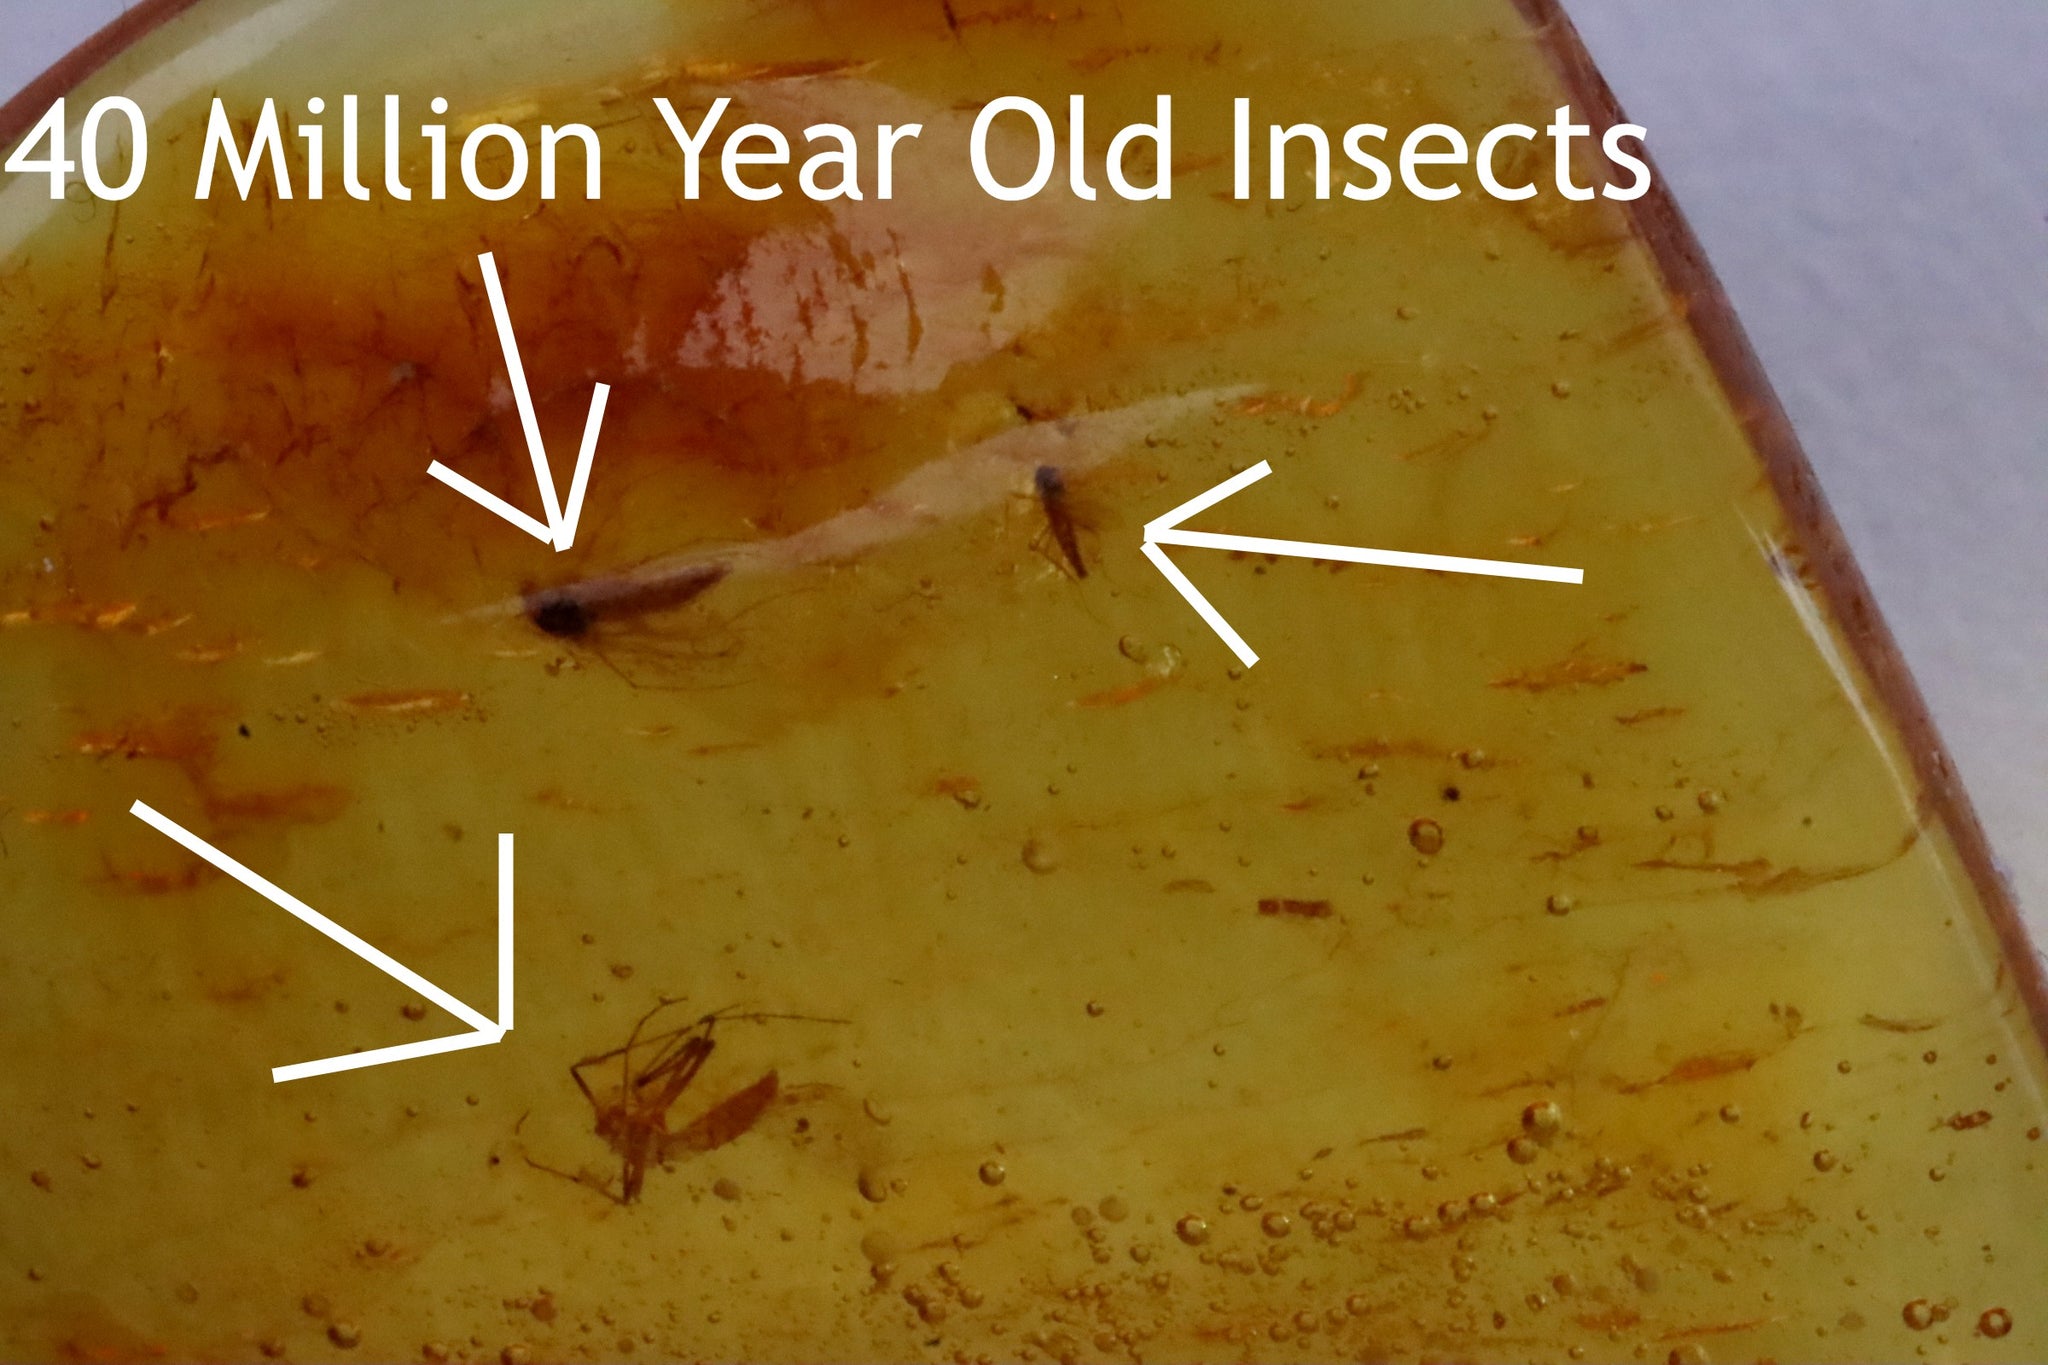 3 X Very Clear Insects In 40 Million Year Old Baltic Amber and air Bubbles